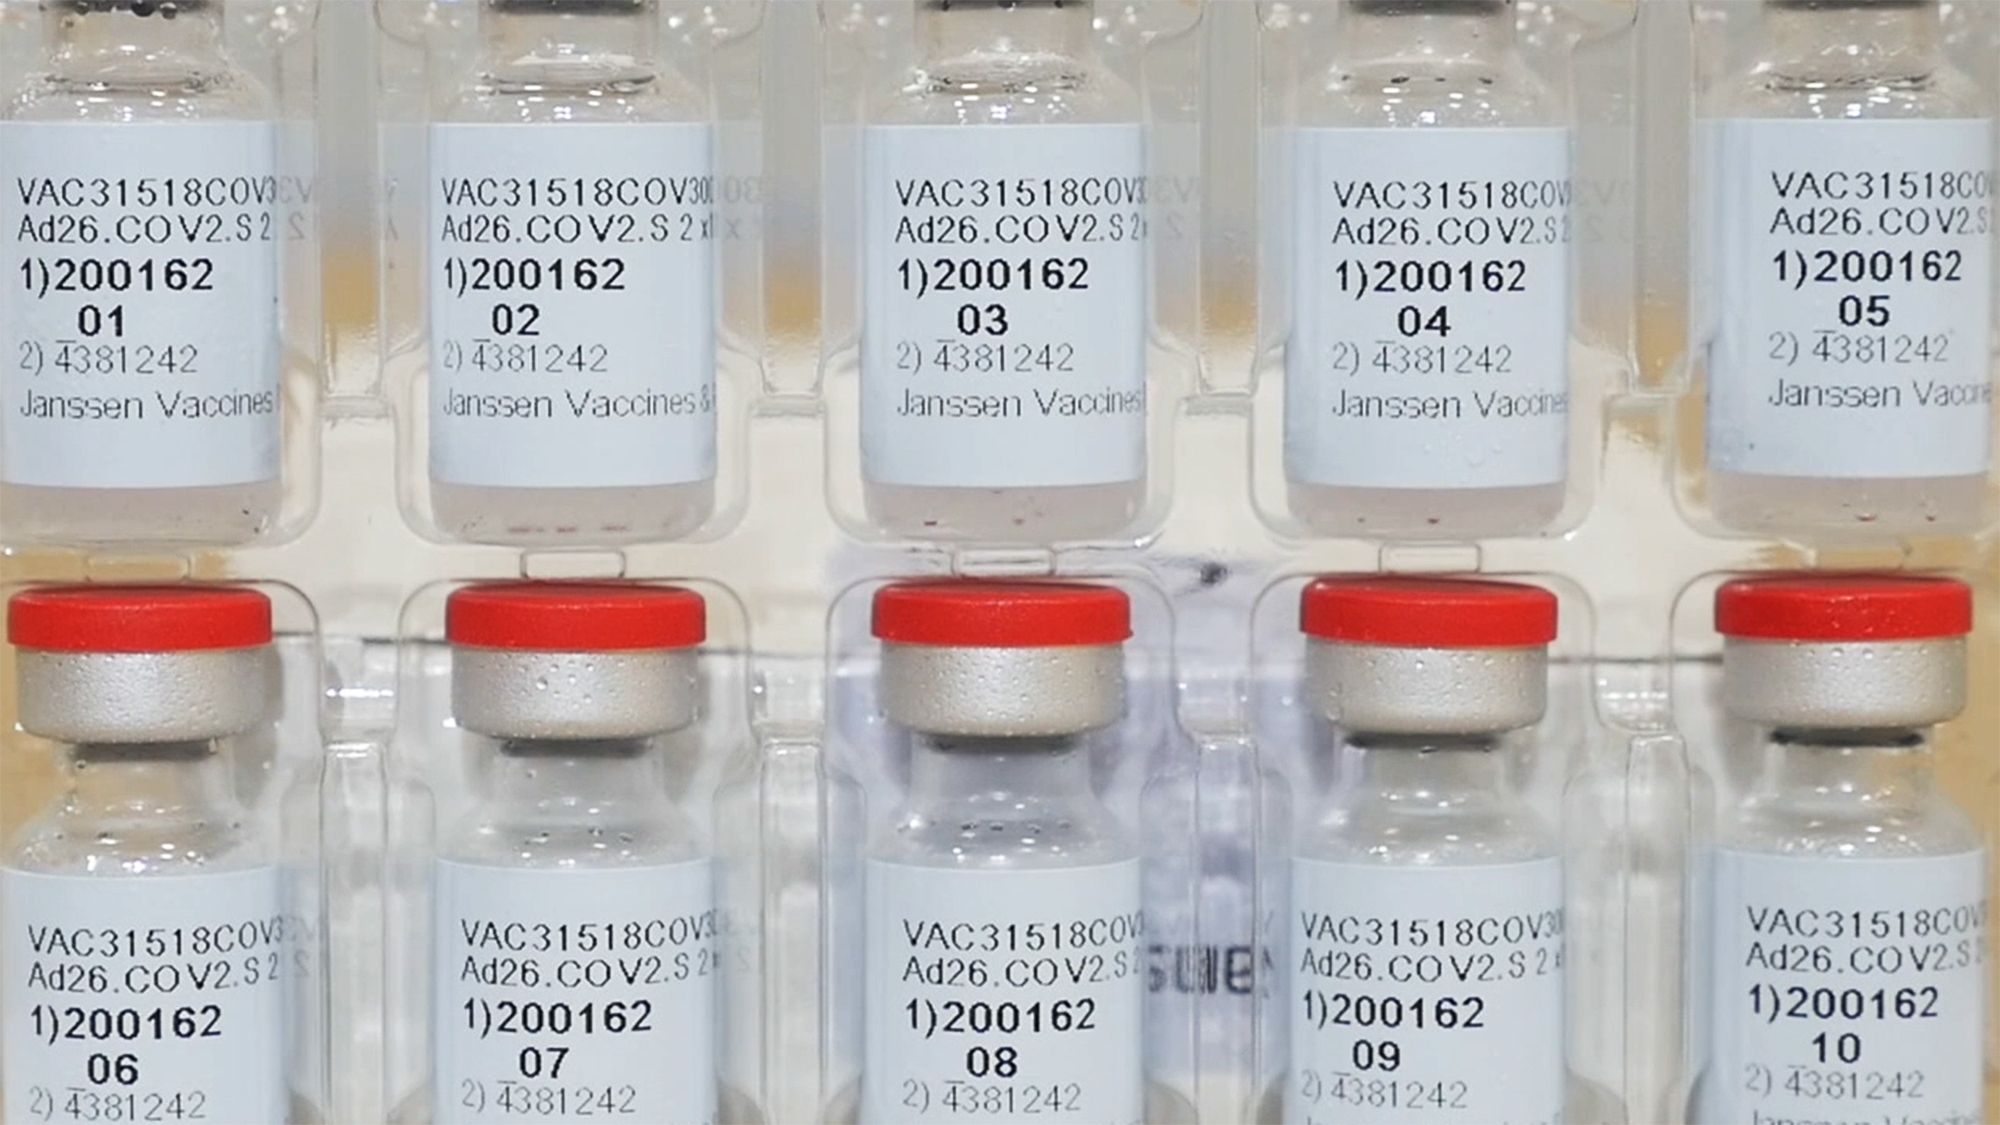 This file photo provided by Johnson & Johnson shows vials of the Janssen COVID-19 vaccine in the United States, on December 2, 2020.